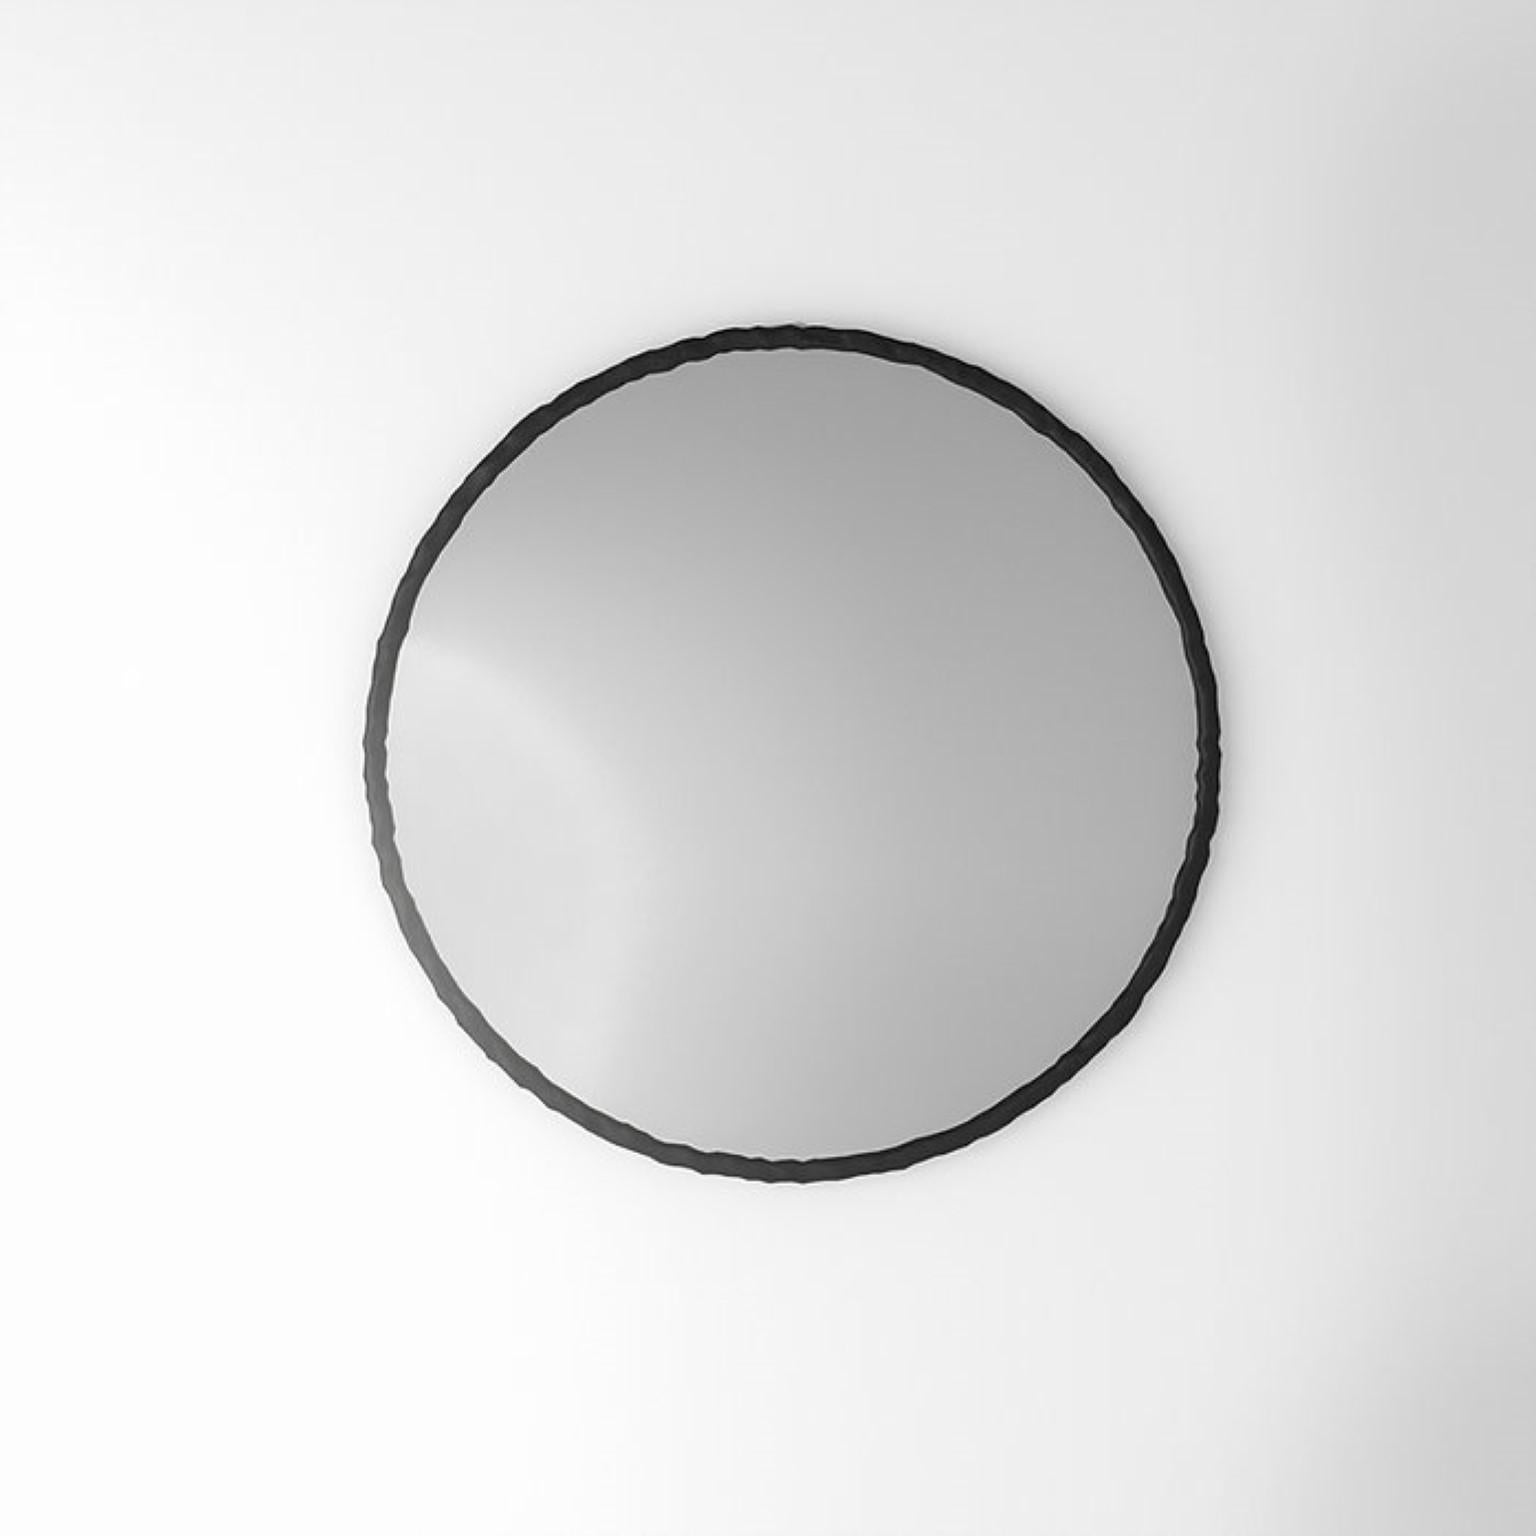 Round Mirror by Faina
Design: Victoriya Yakusha
Materials: Steel, flax rubber, biopolymer, cellulose, wood materials, mirror
Dimensions: D 80 cm

In search of new-old design messages, Victoria Yakusha conducted a study of the daily traditions of our